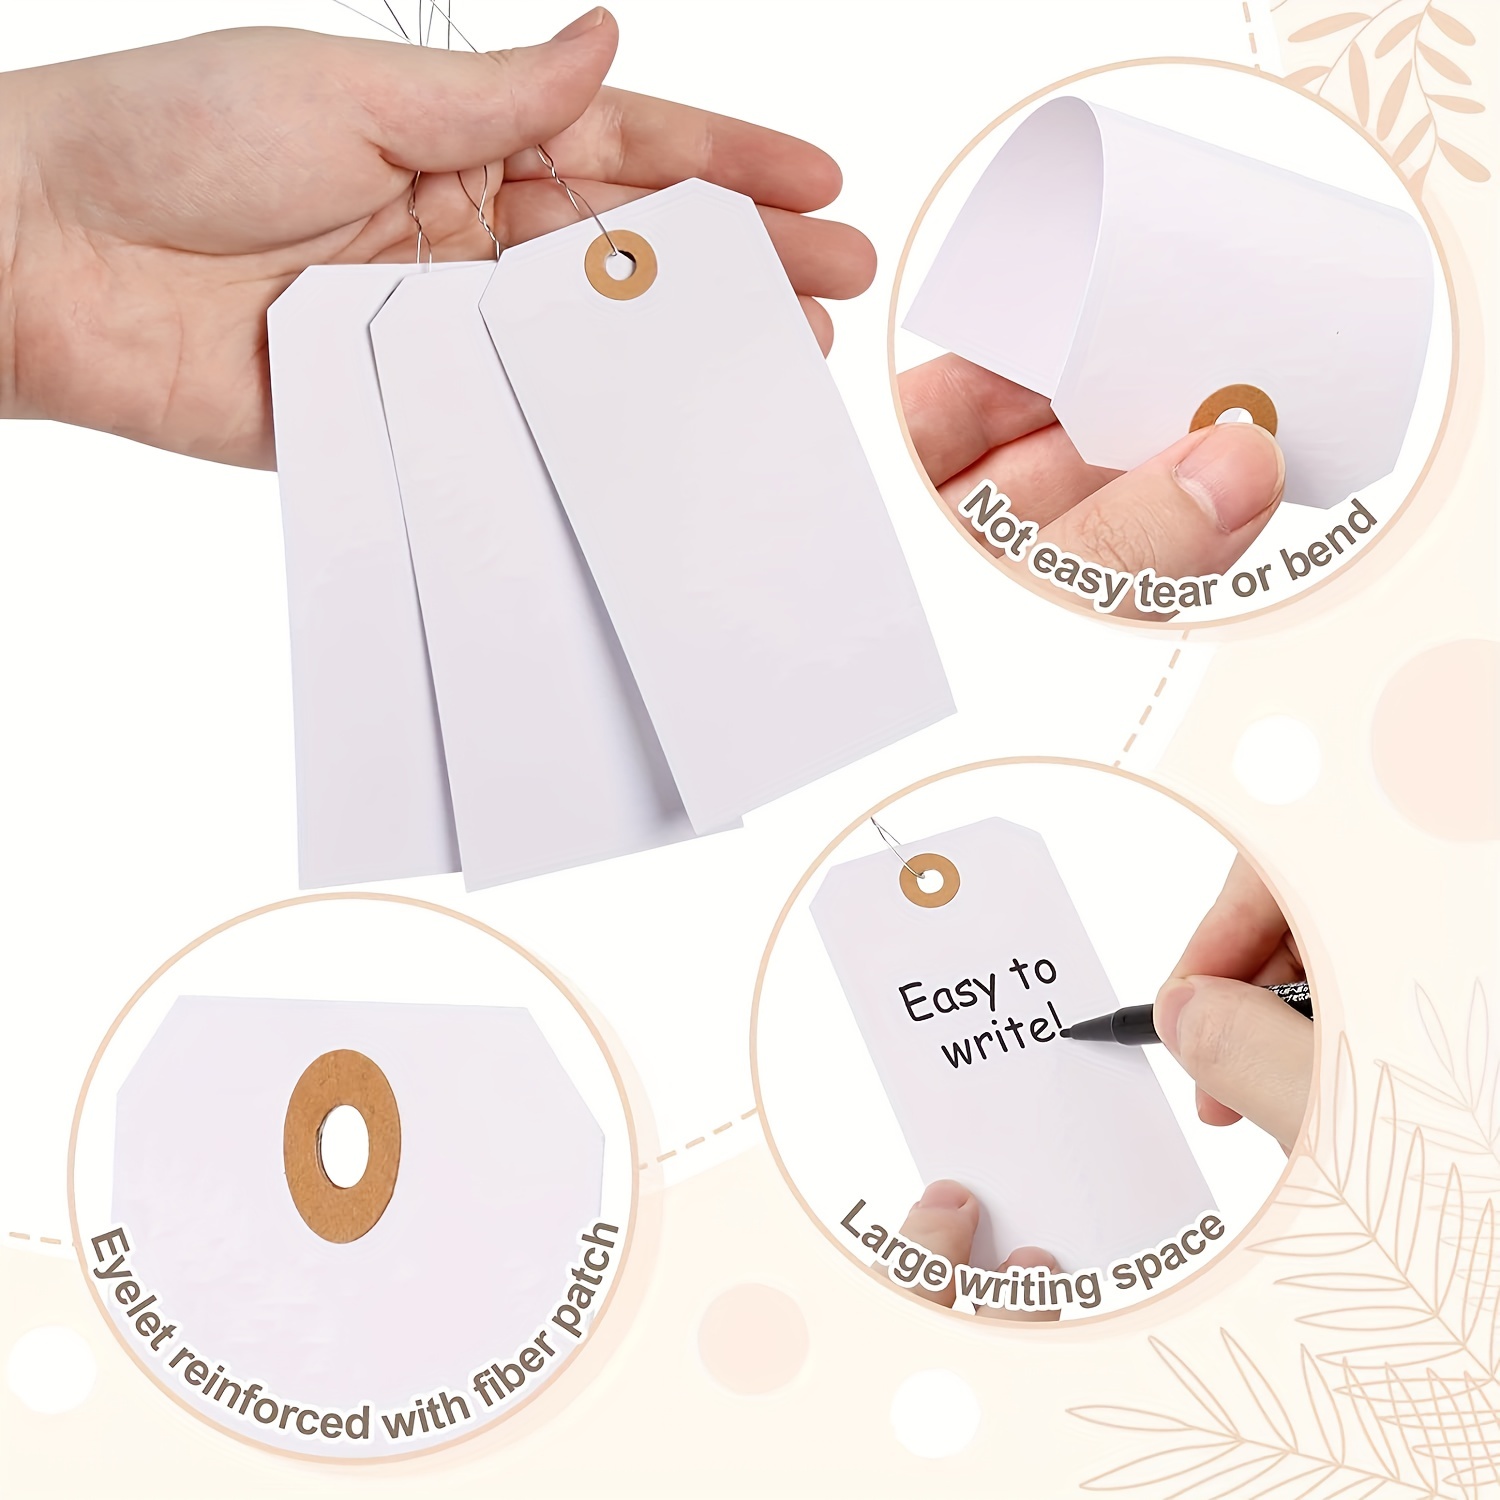  60 Pieces Blank Manila Shipping Tags with Elastic String  Attached Inventory Tags Luggage Paper Tag Present Tags Cardboard Tags with  String Hang Label Tags with Reinforced Hole 4 3/4 x